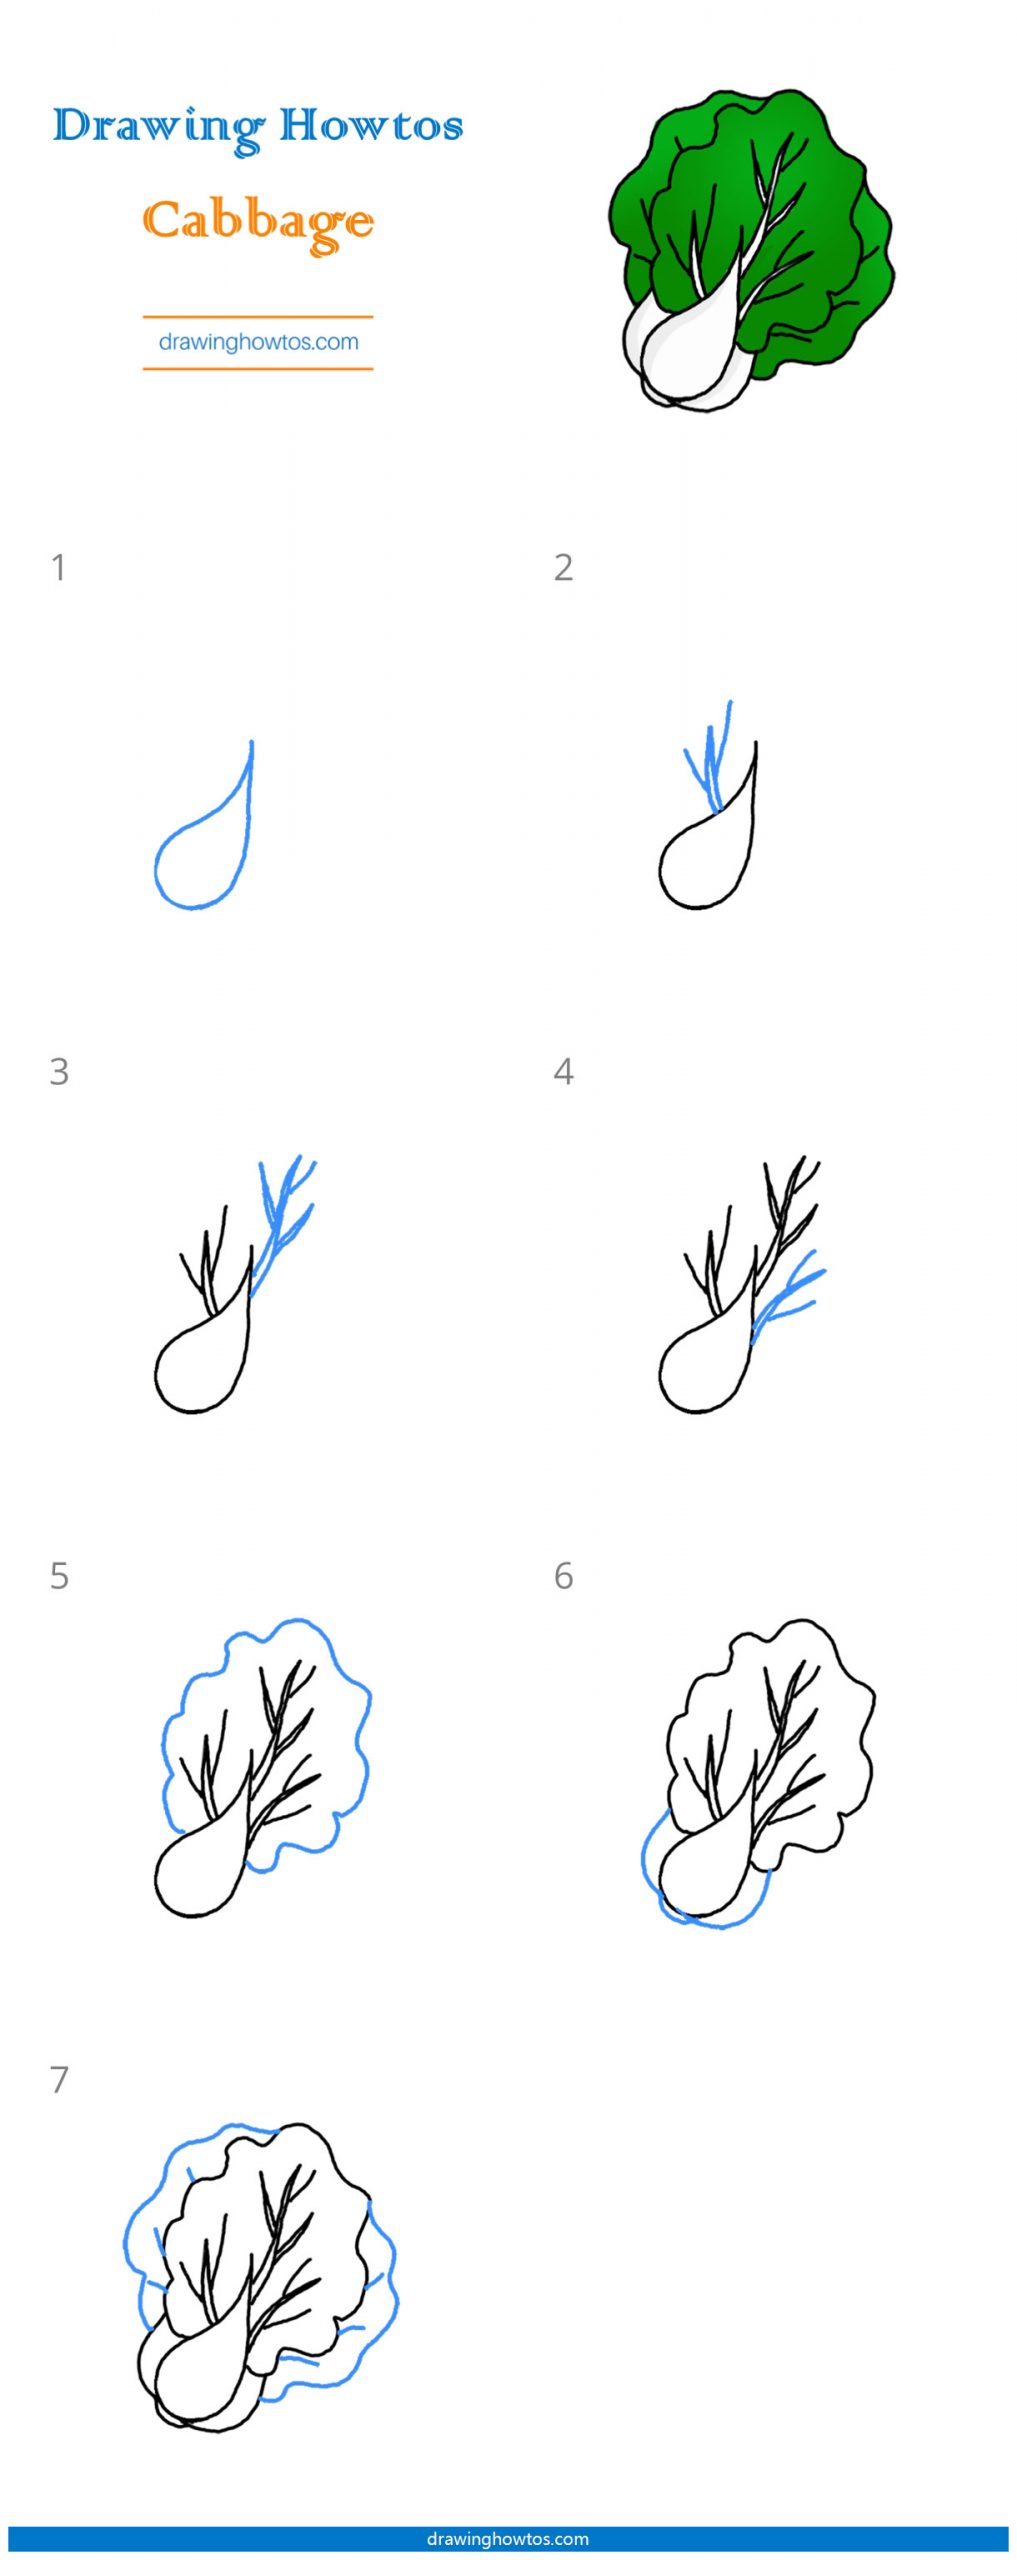 How to Draw Bok Choy Step by Step